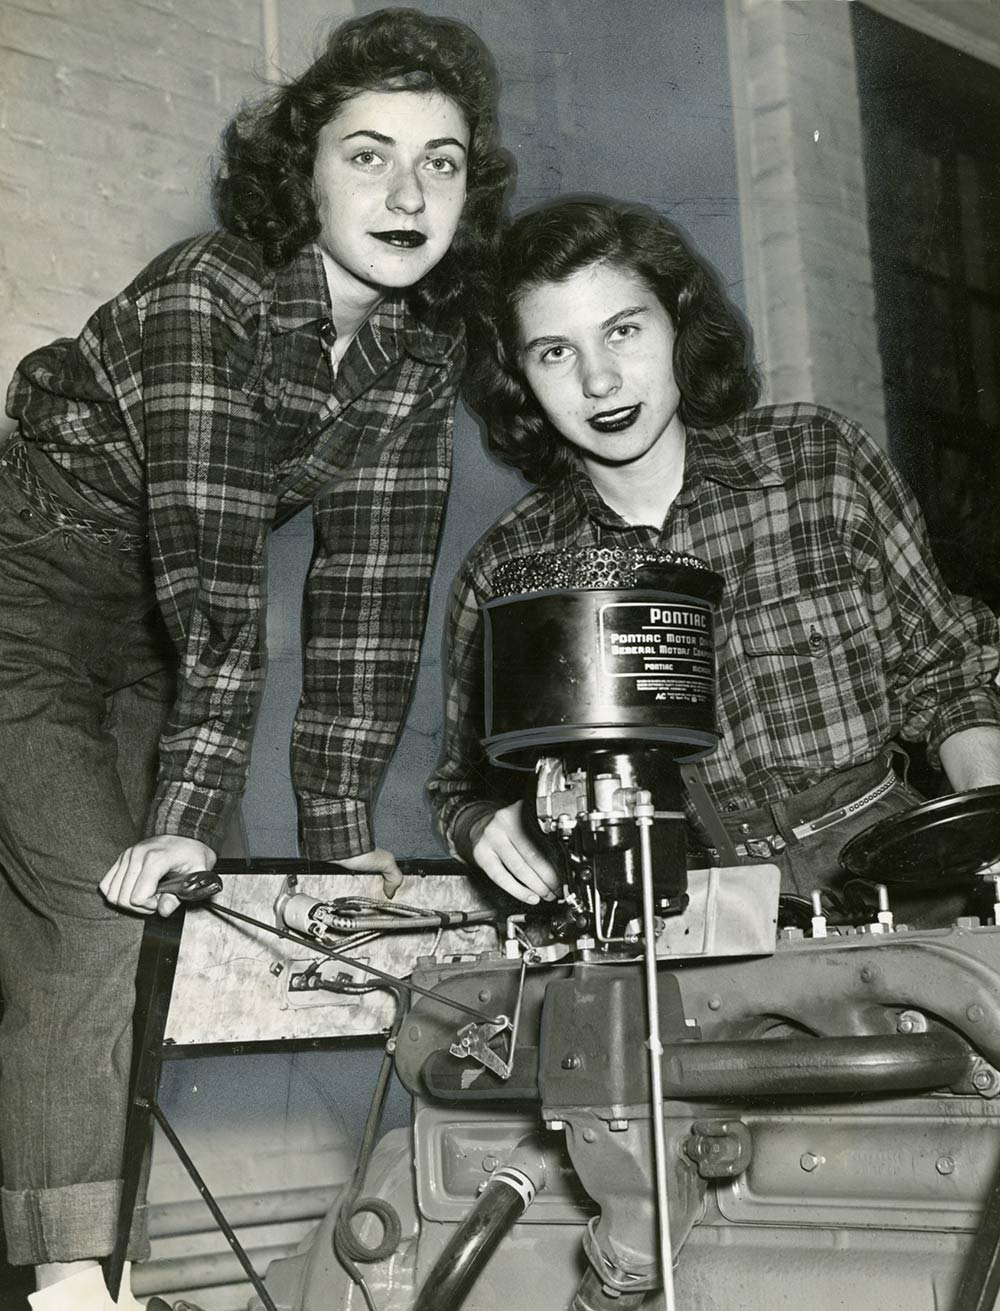 Two women students in plaid shirts work on motor.